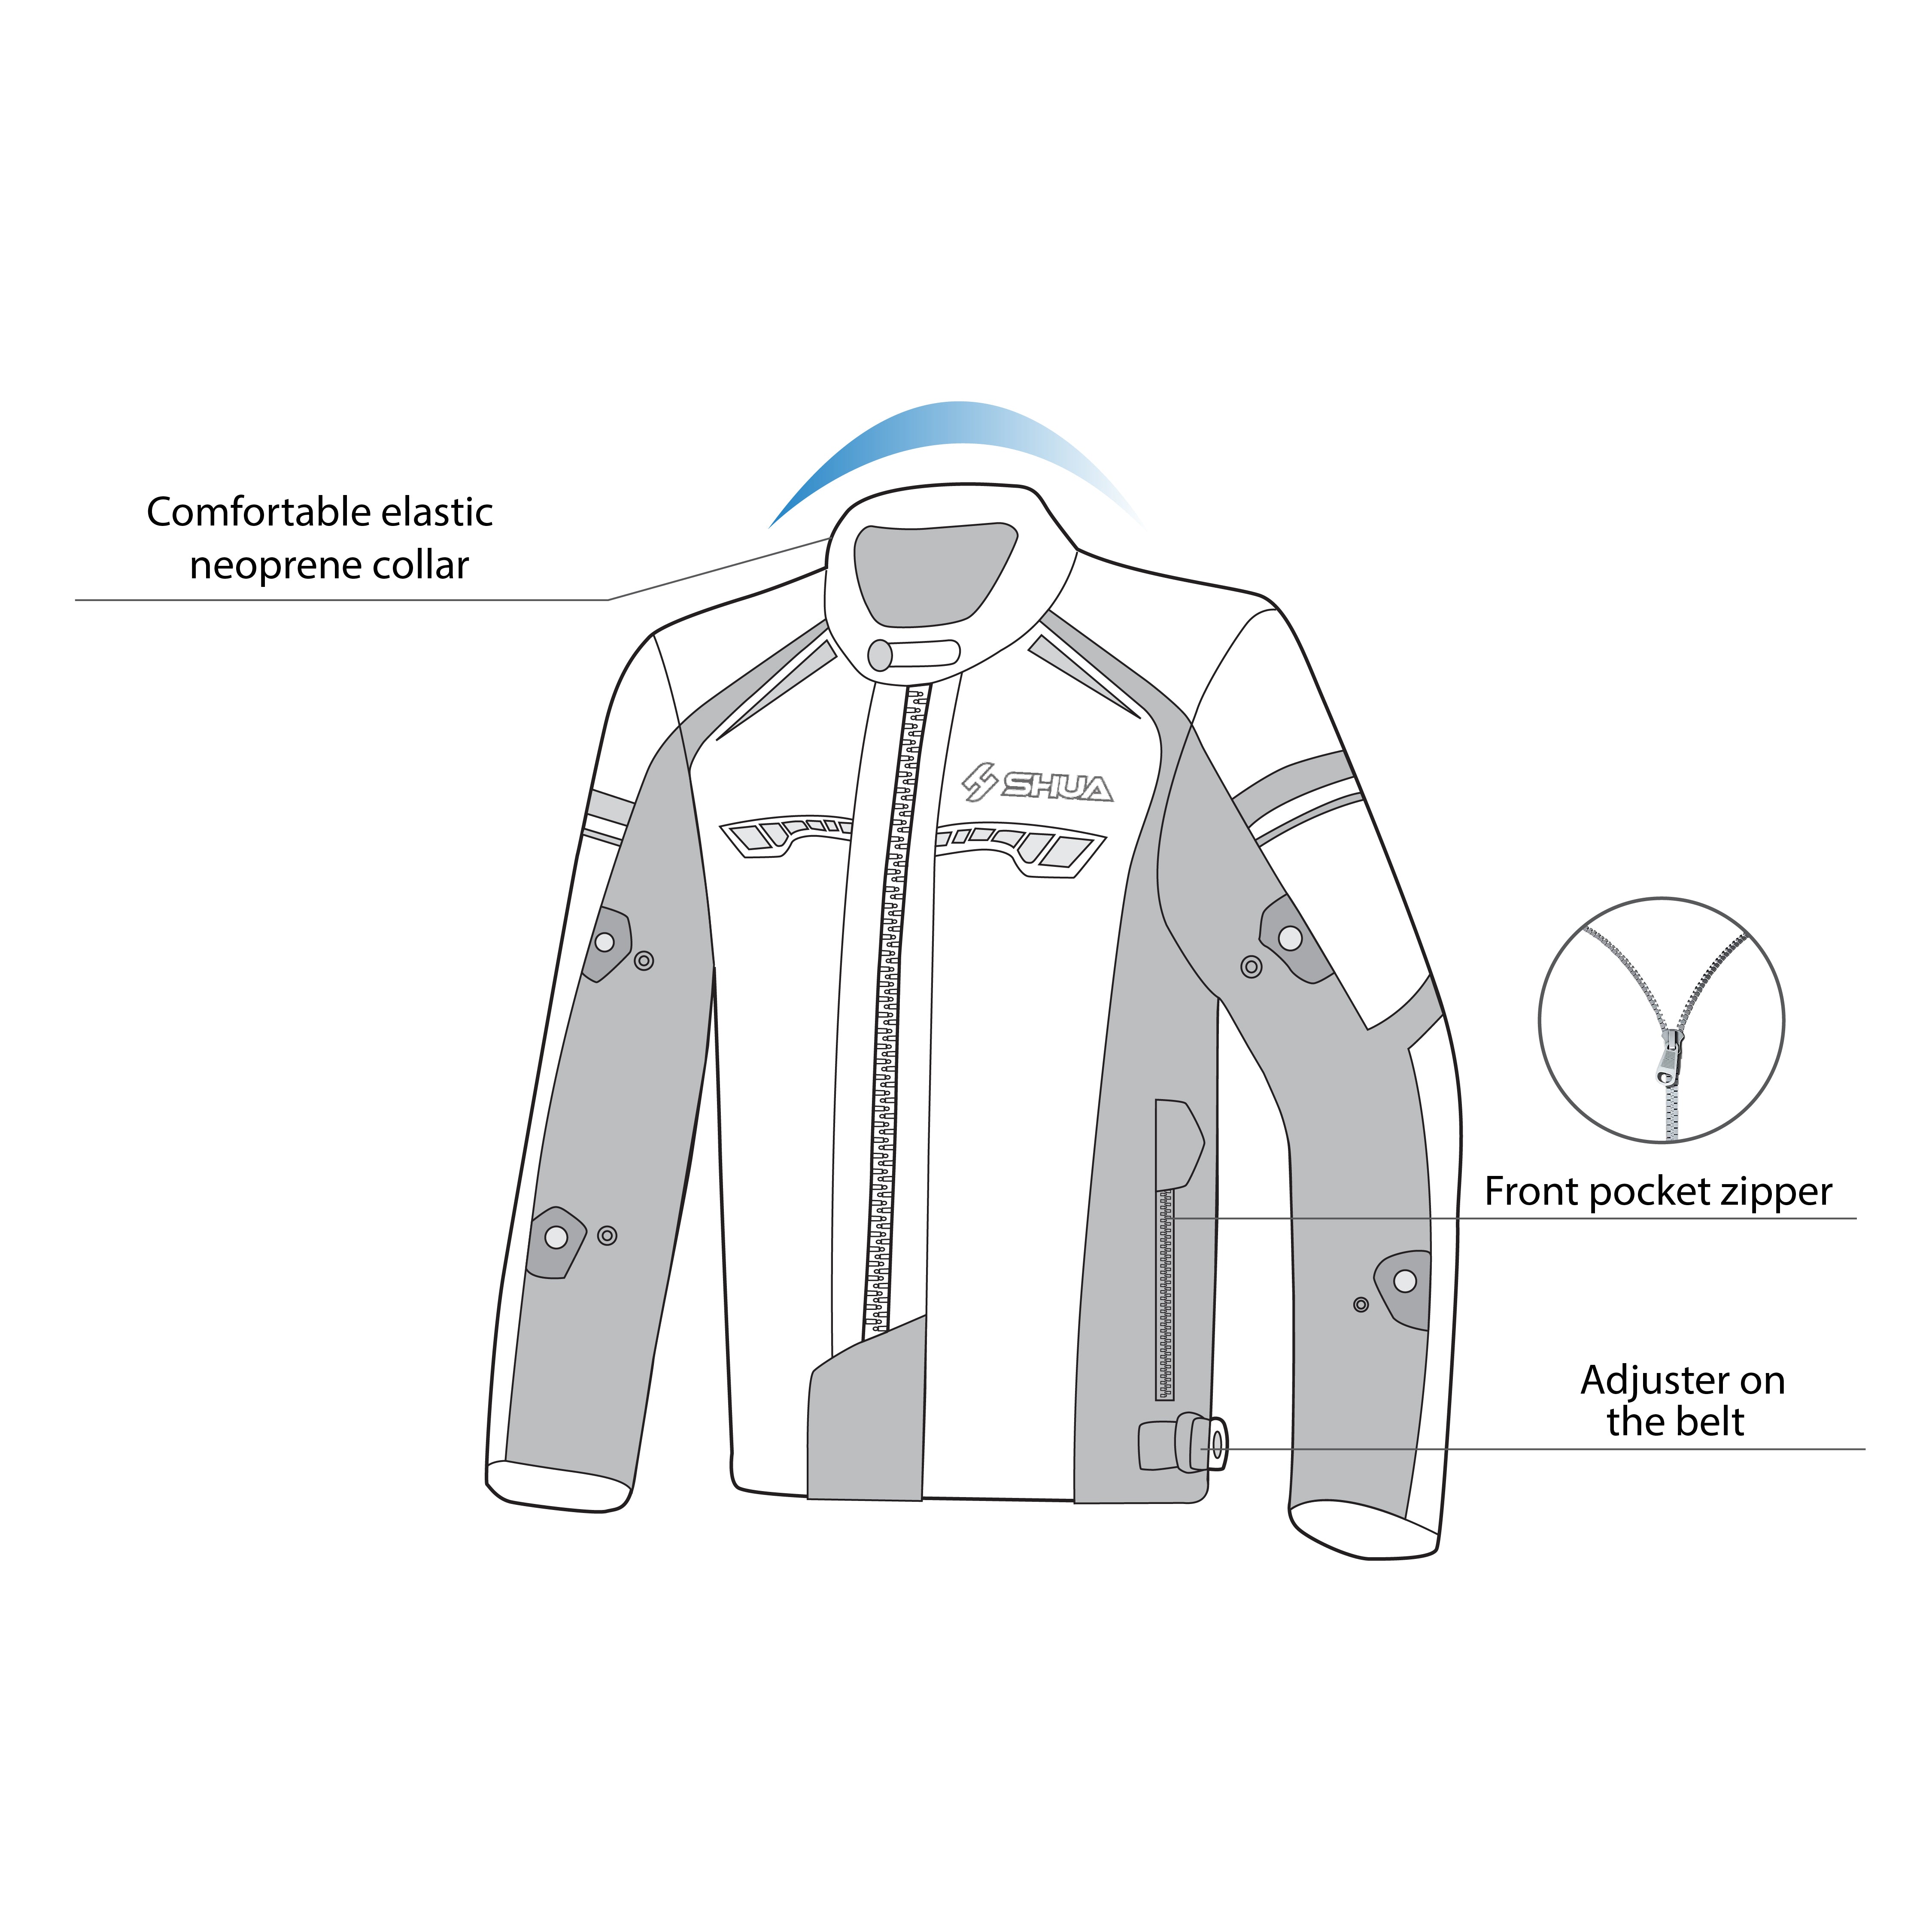 infographic sketch shua immortal textile racing jacket black and yellow flouro top front side view